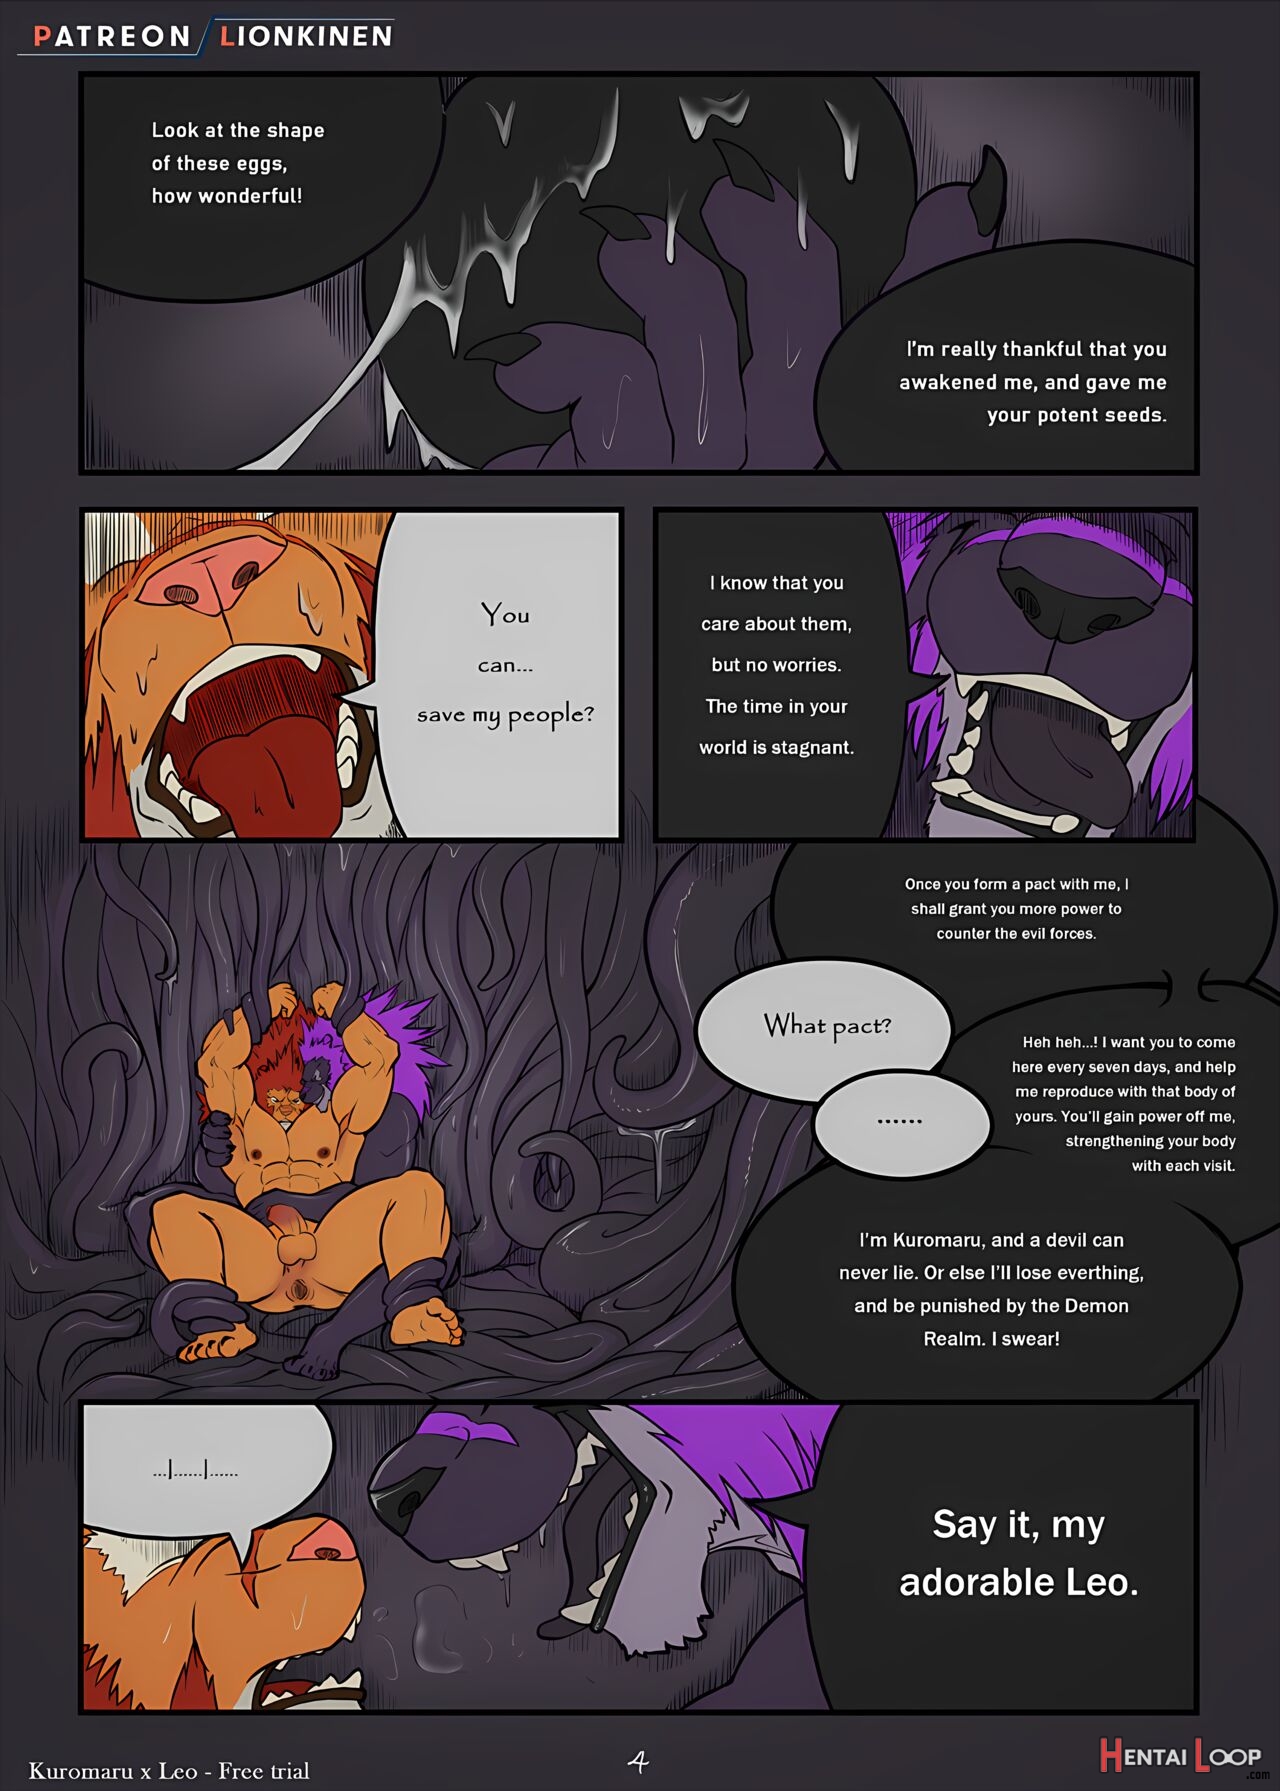 Demonic Pact - Reproduce page 4